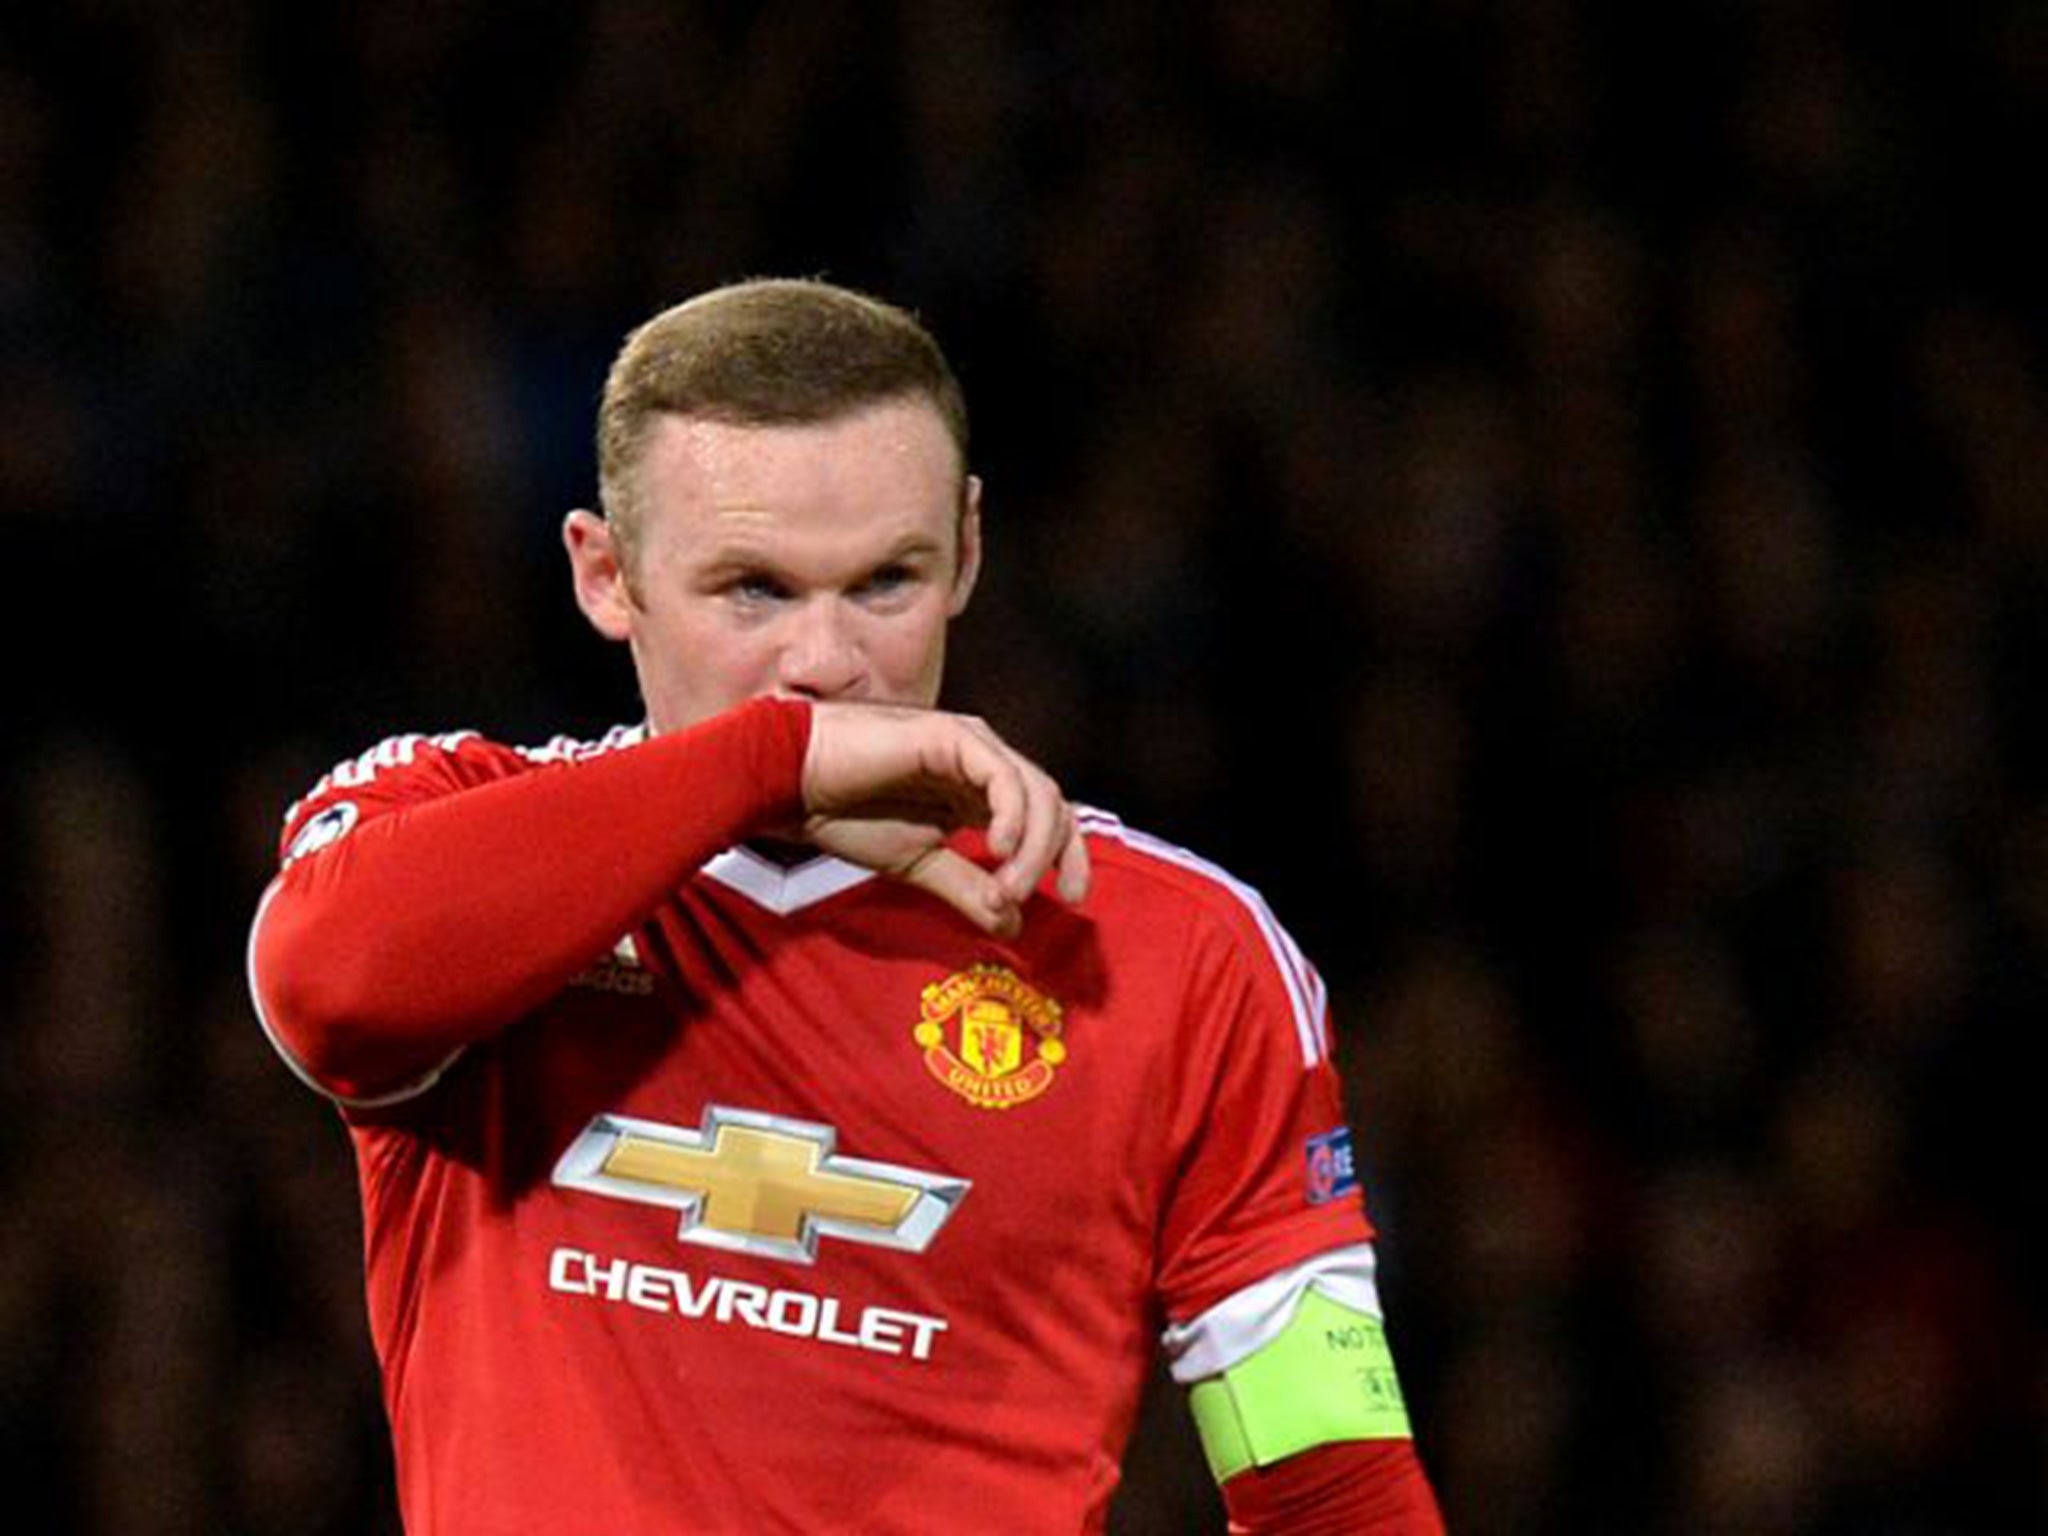 Wayne Rooney will become only the 10th player to make 500 appearances for Manchester United